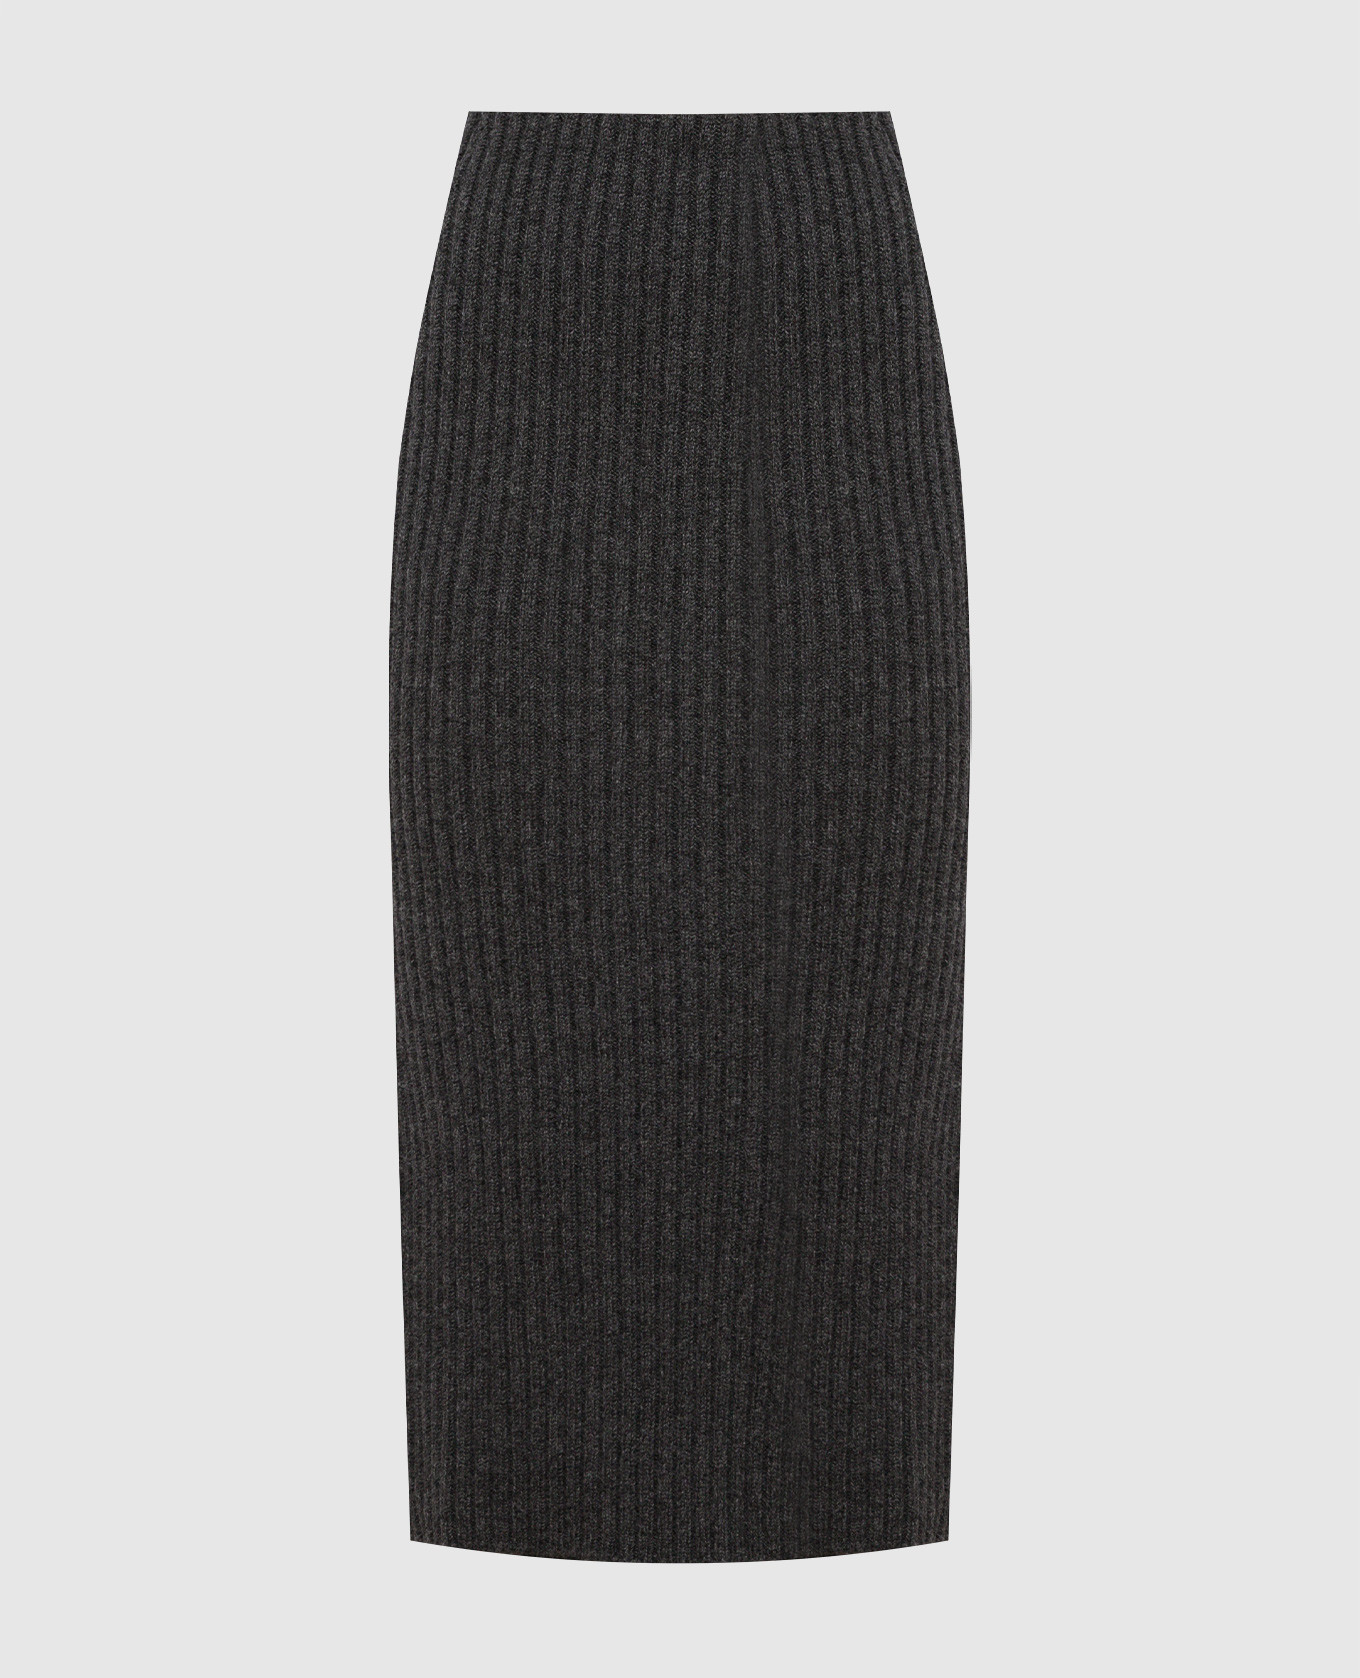 Gray skirt made of wool in a rib with a slit